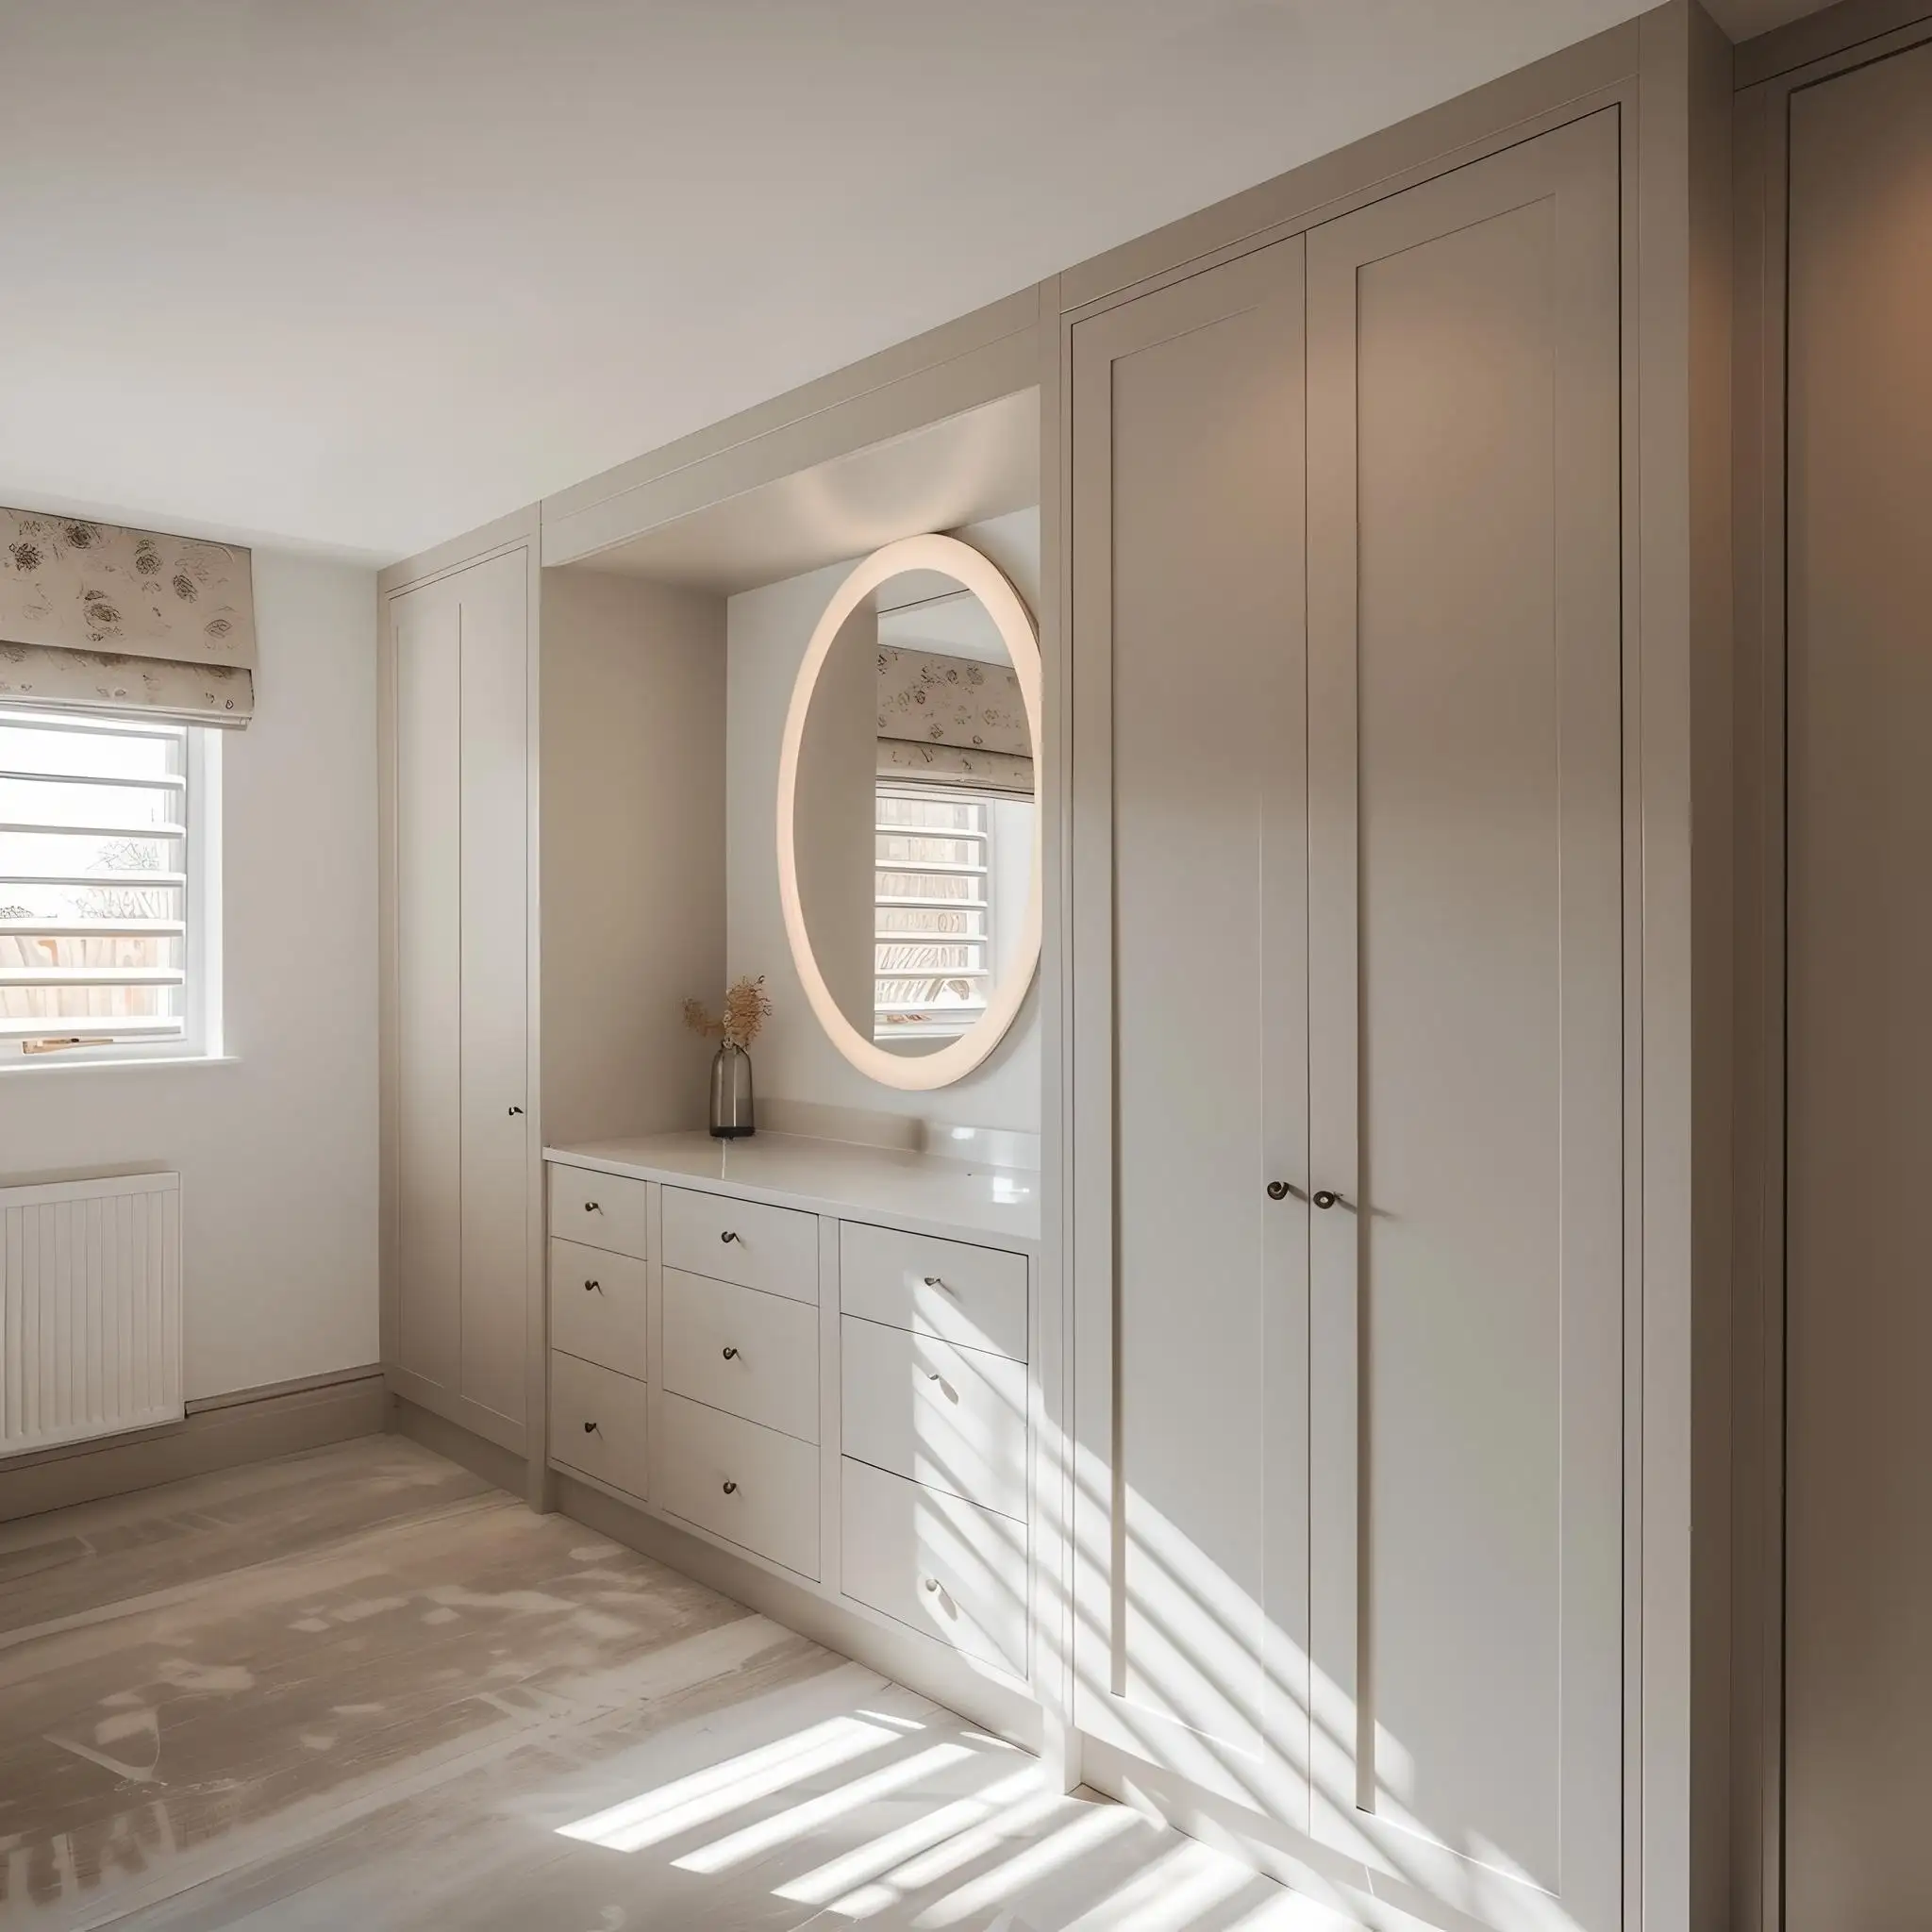 Elegant vanity unit built into the centre of the fitted wardrobe